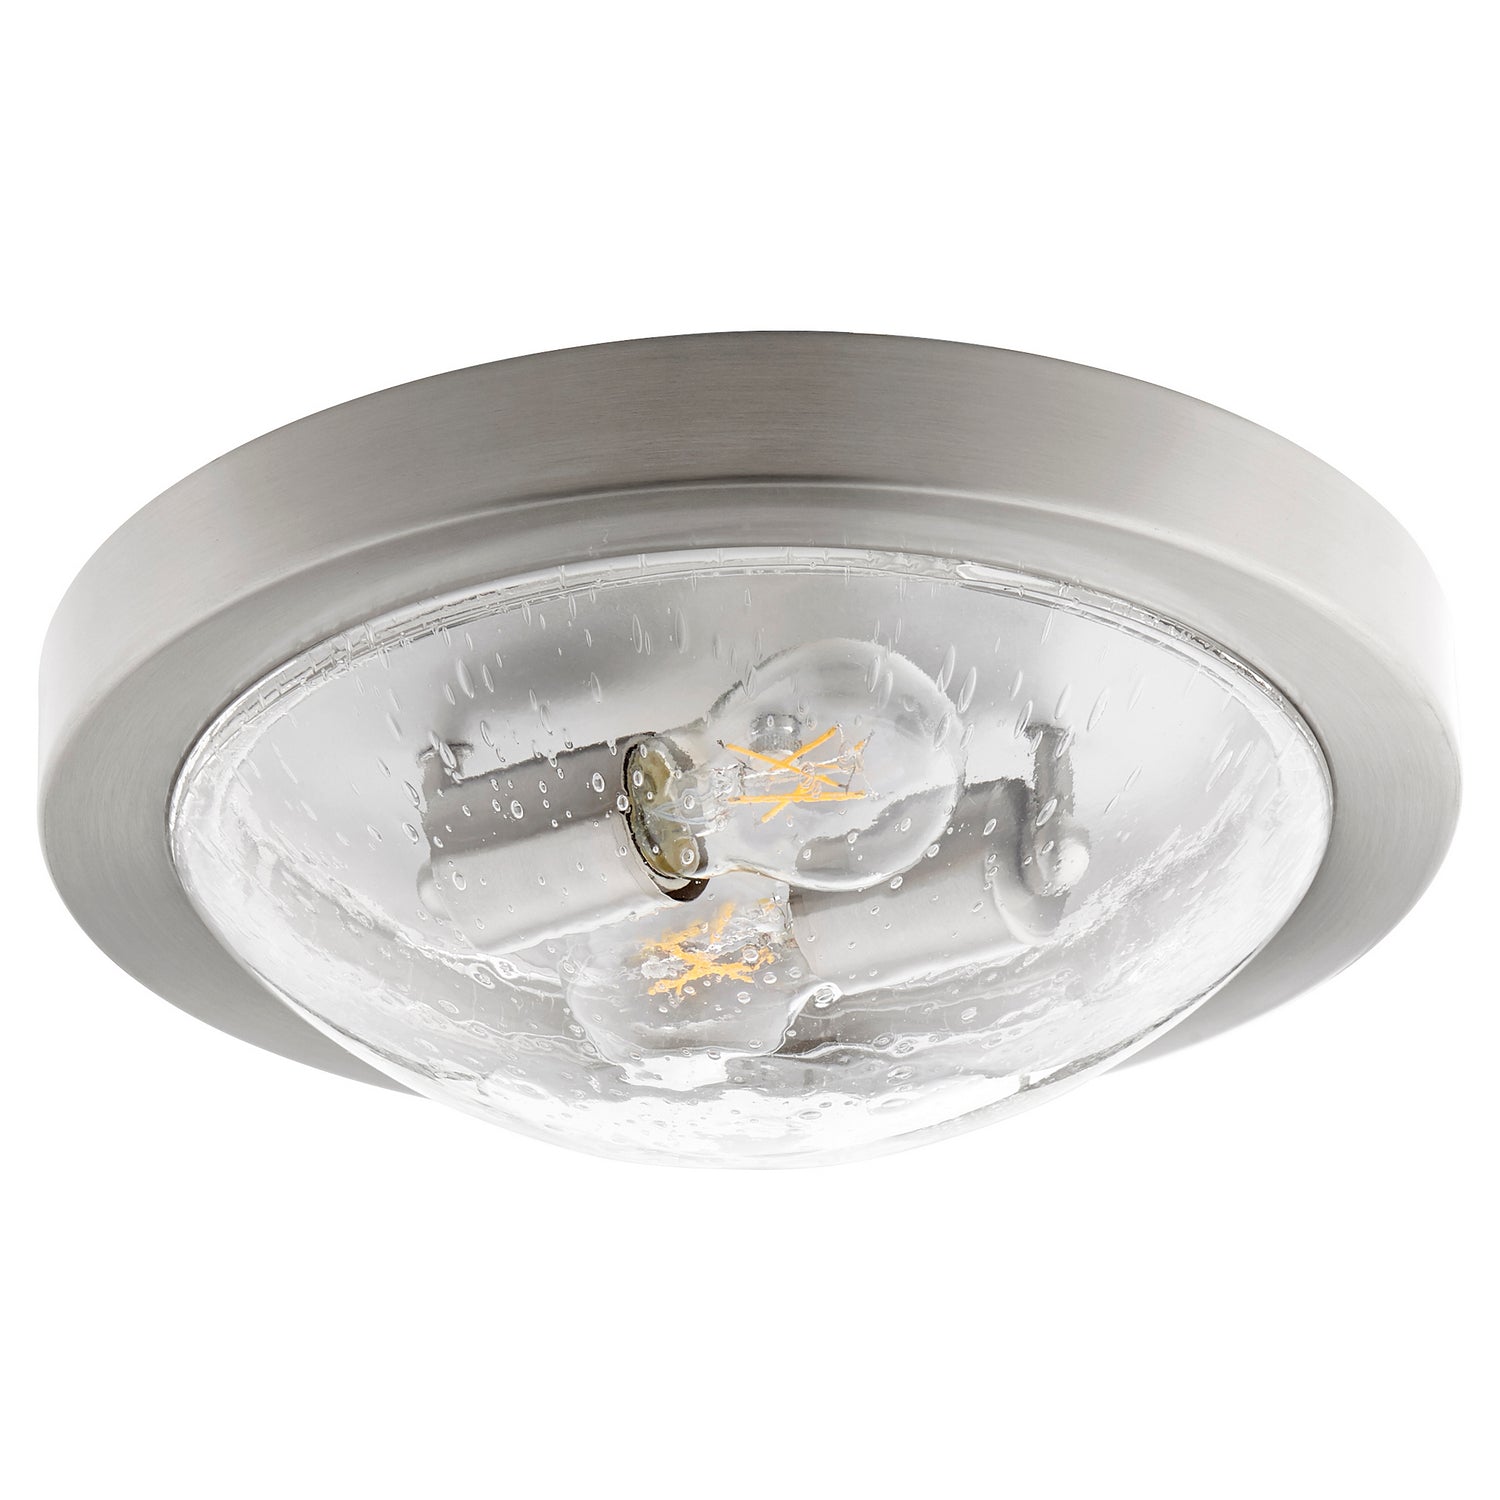 Quorum - 3502-13-65 - Two Light Ceiling Mount - 3502 Contempo Ceiling Mounts - Satin Nickel w/ Clear/Seeded